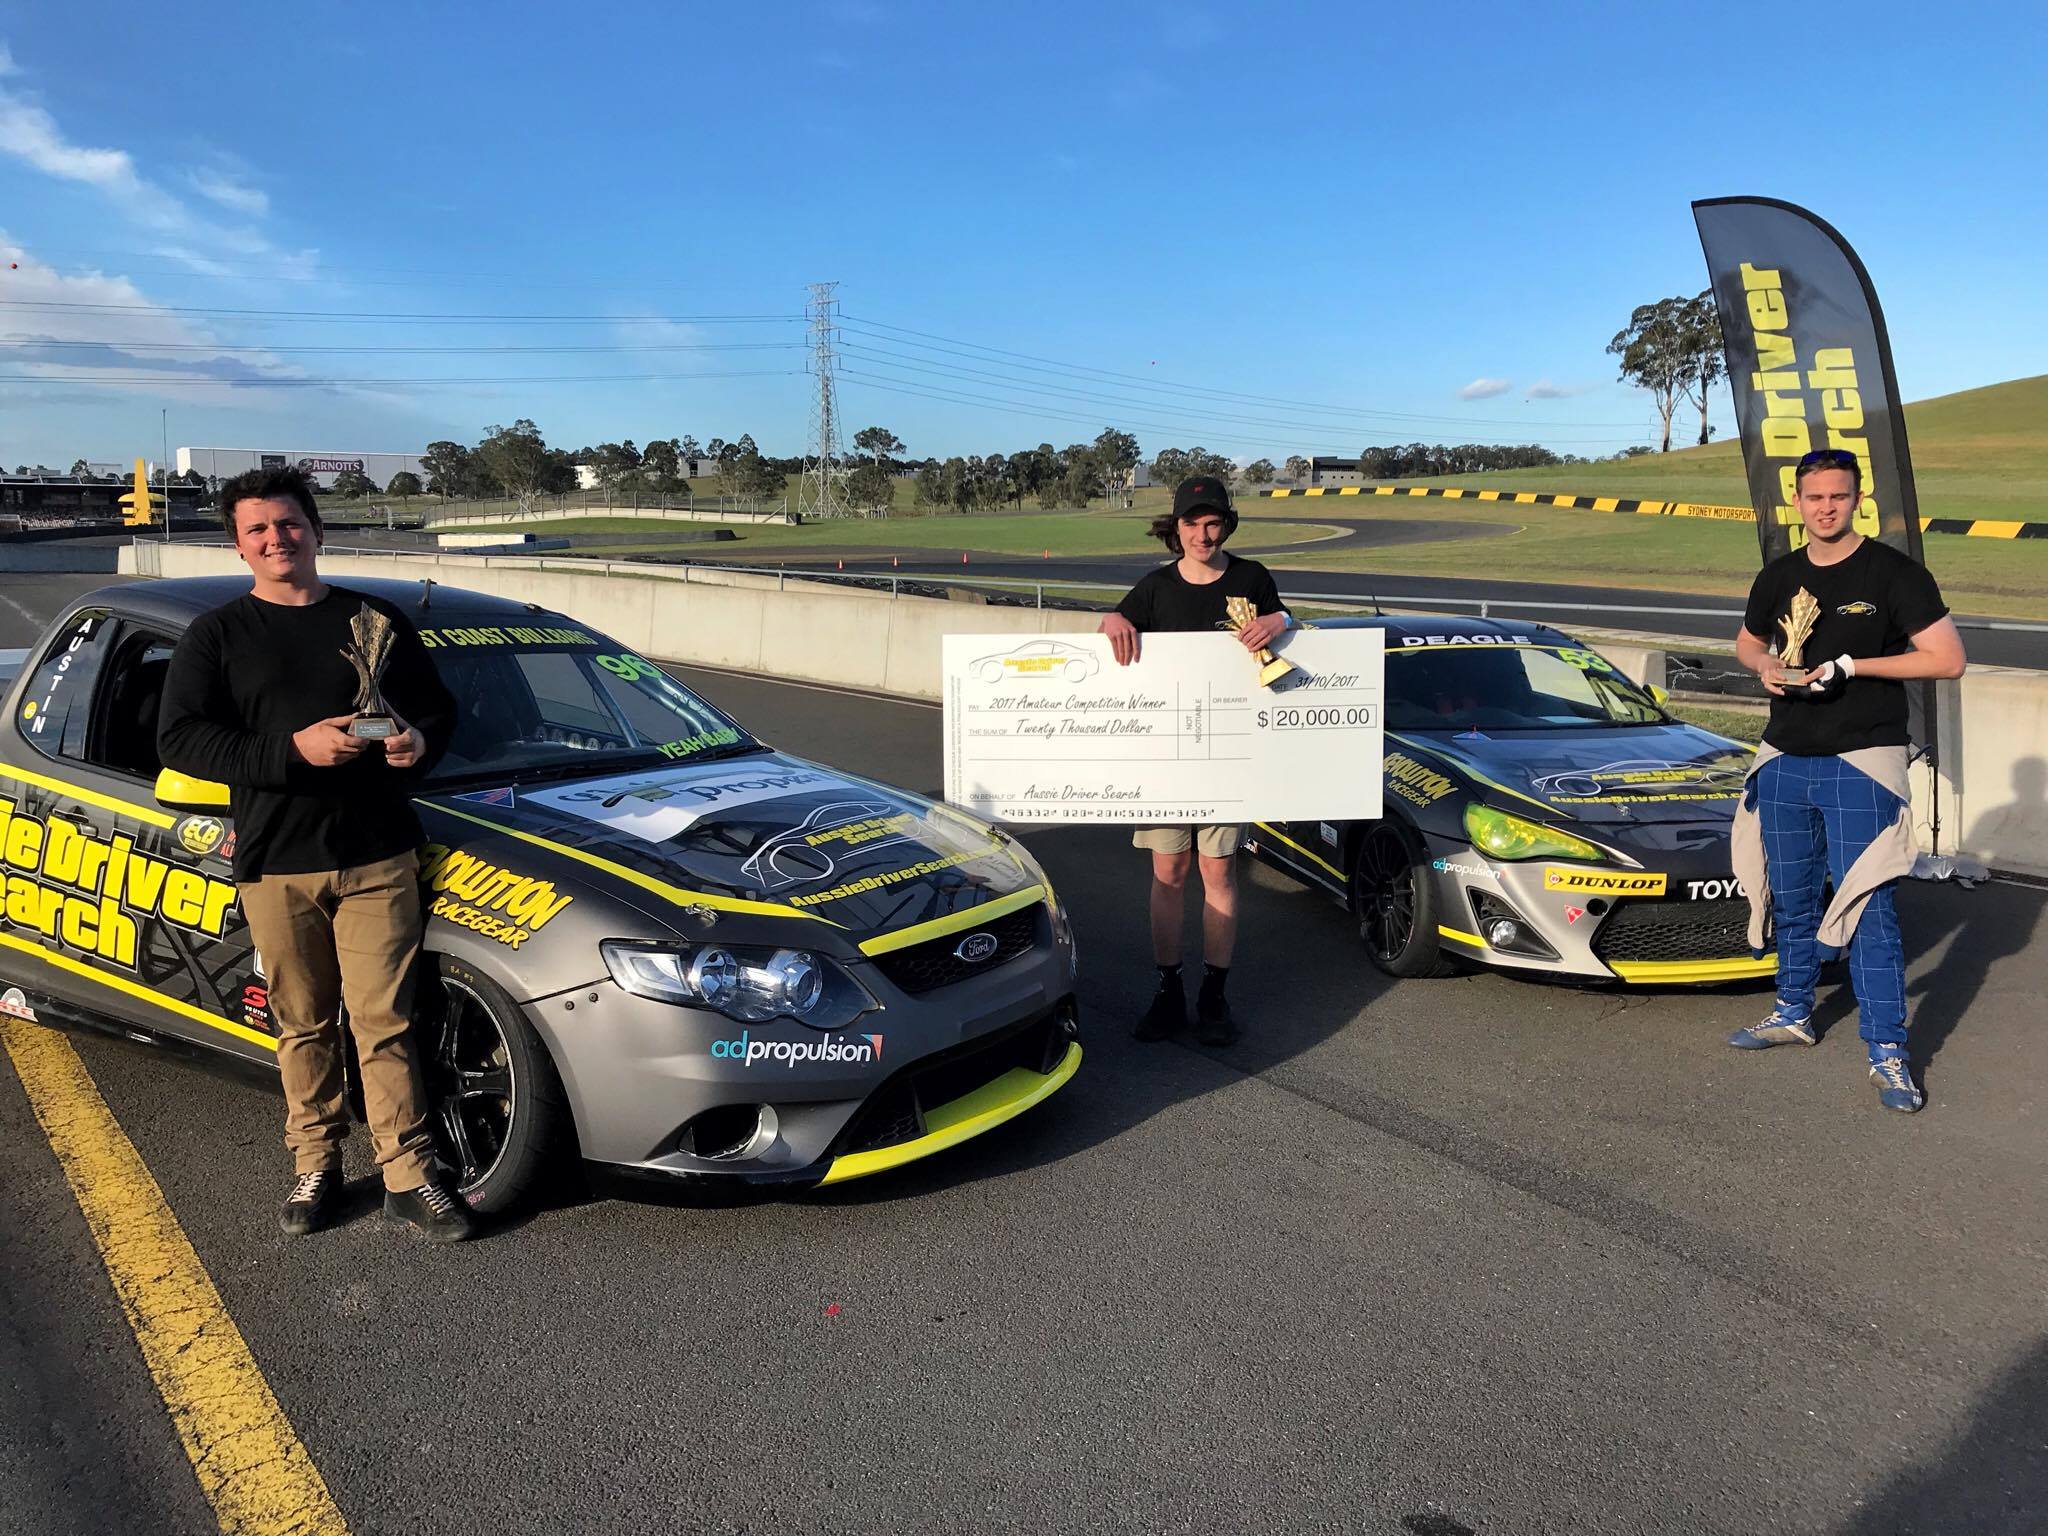 Aussie Driver Search offers Super2 seat to aspiring Australian and Kiwi drivers